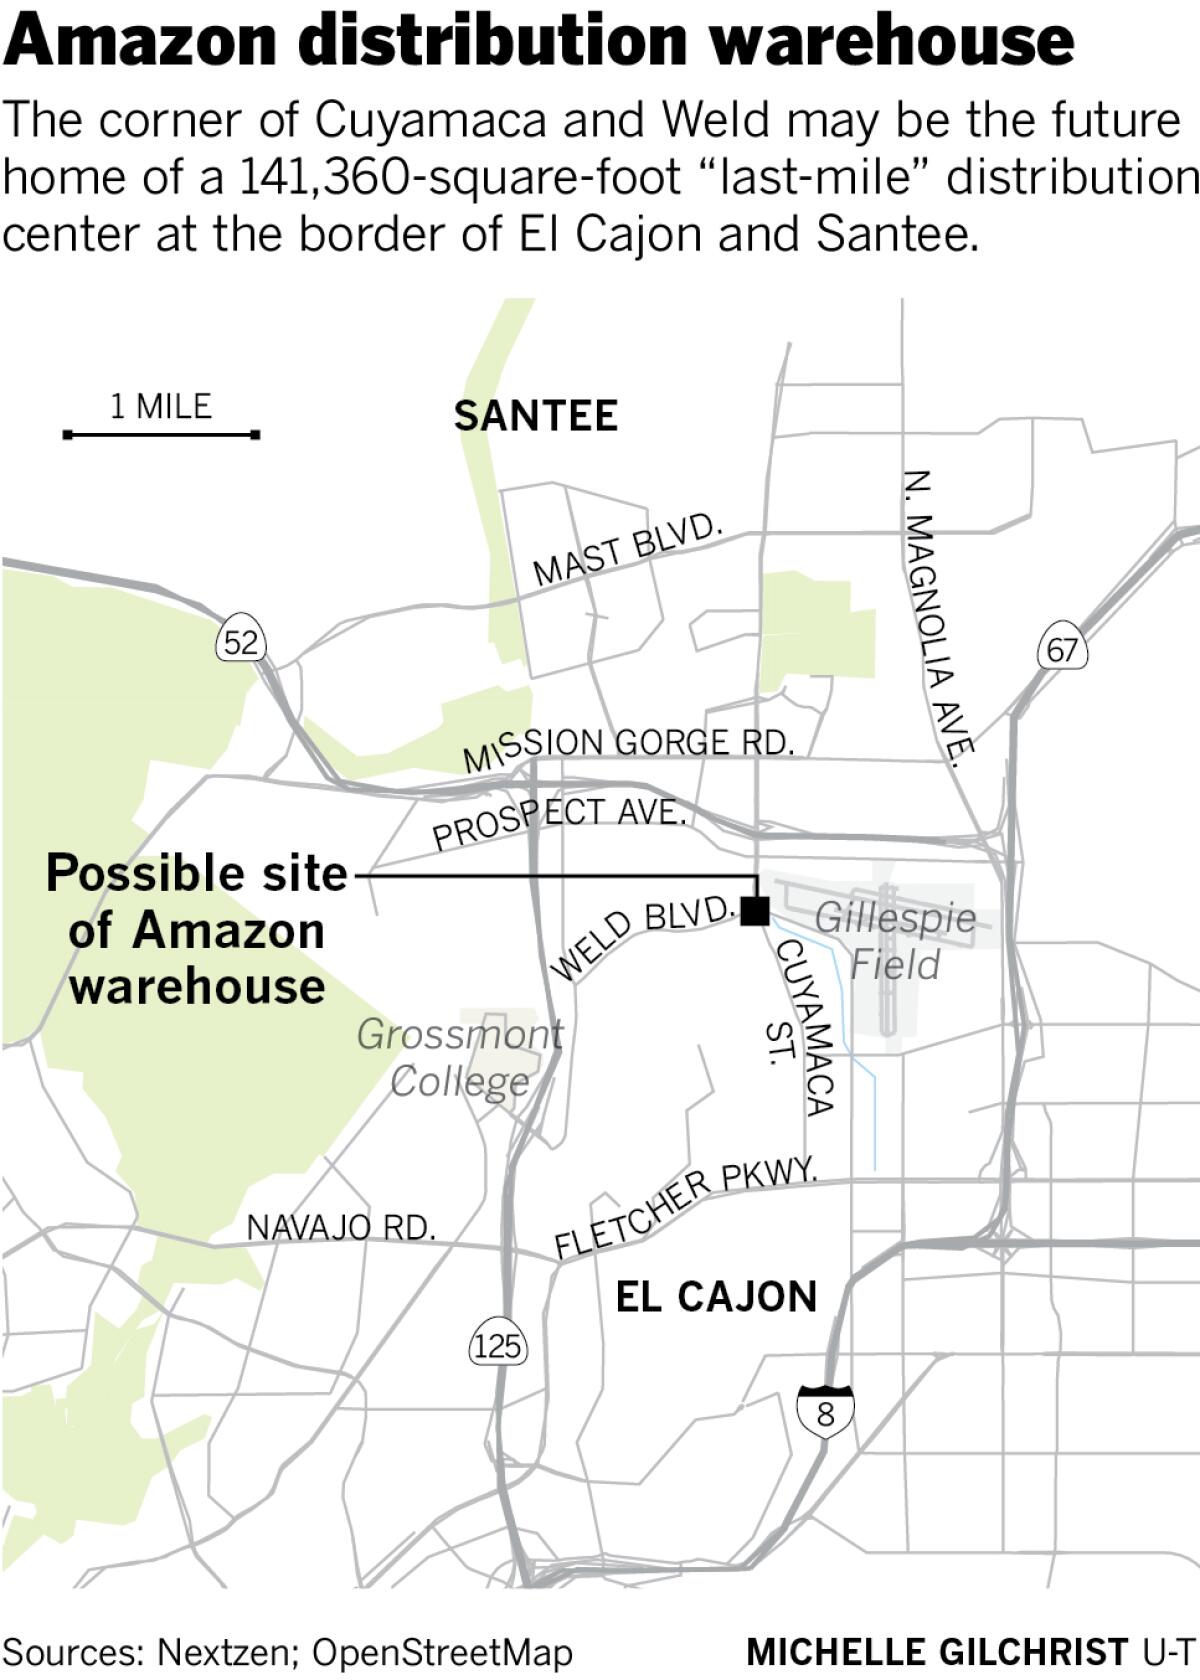 Site of possible Amazon distribution warehouse